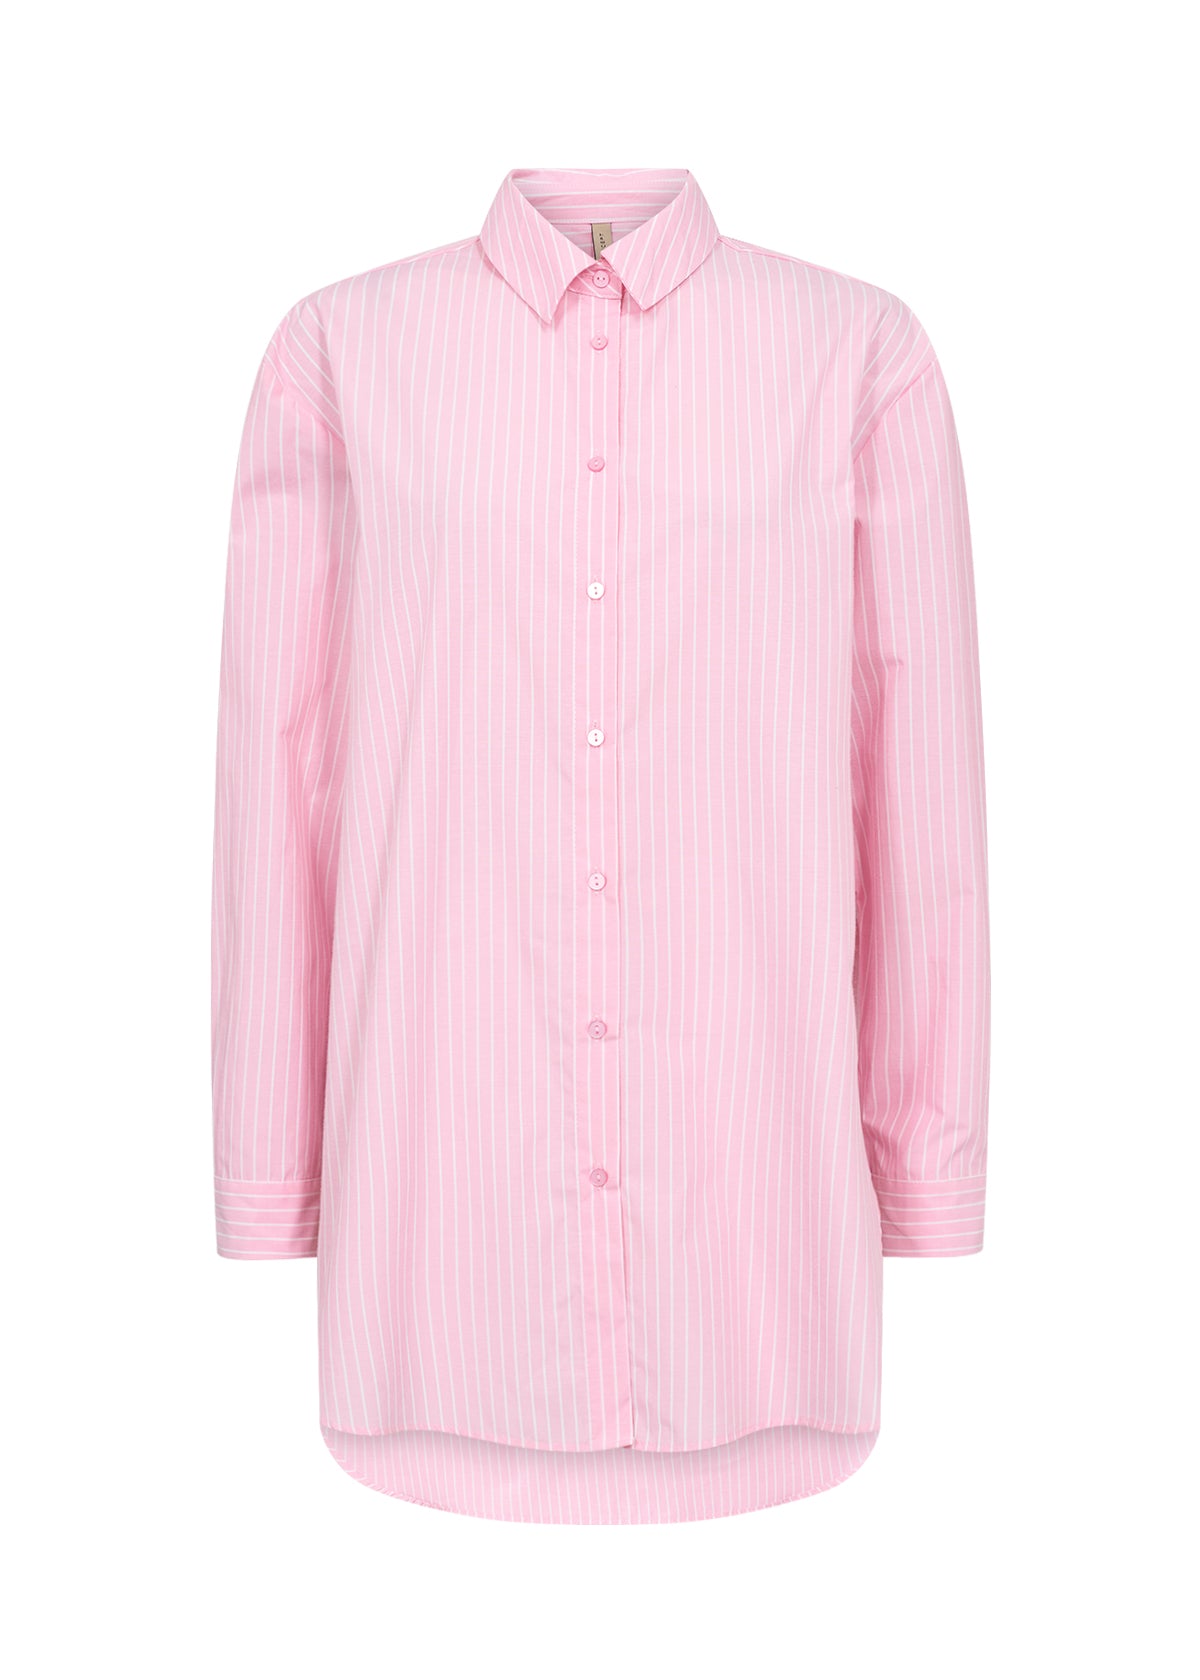 Soya Concept Dicle Pink Shirt